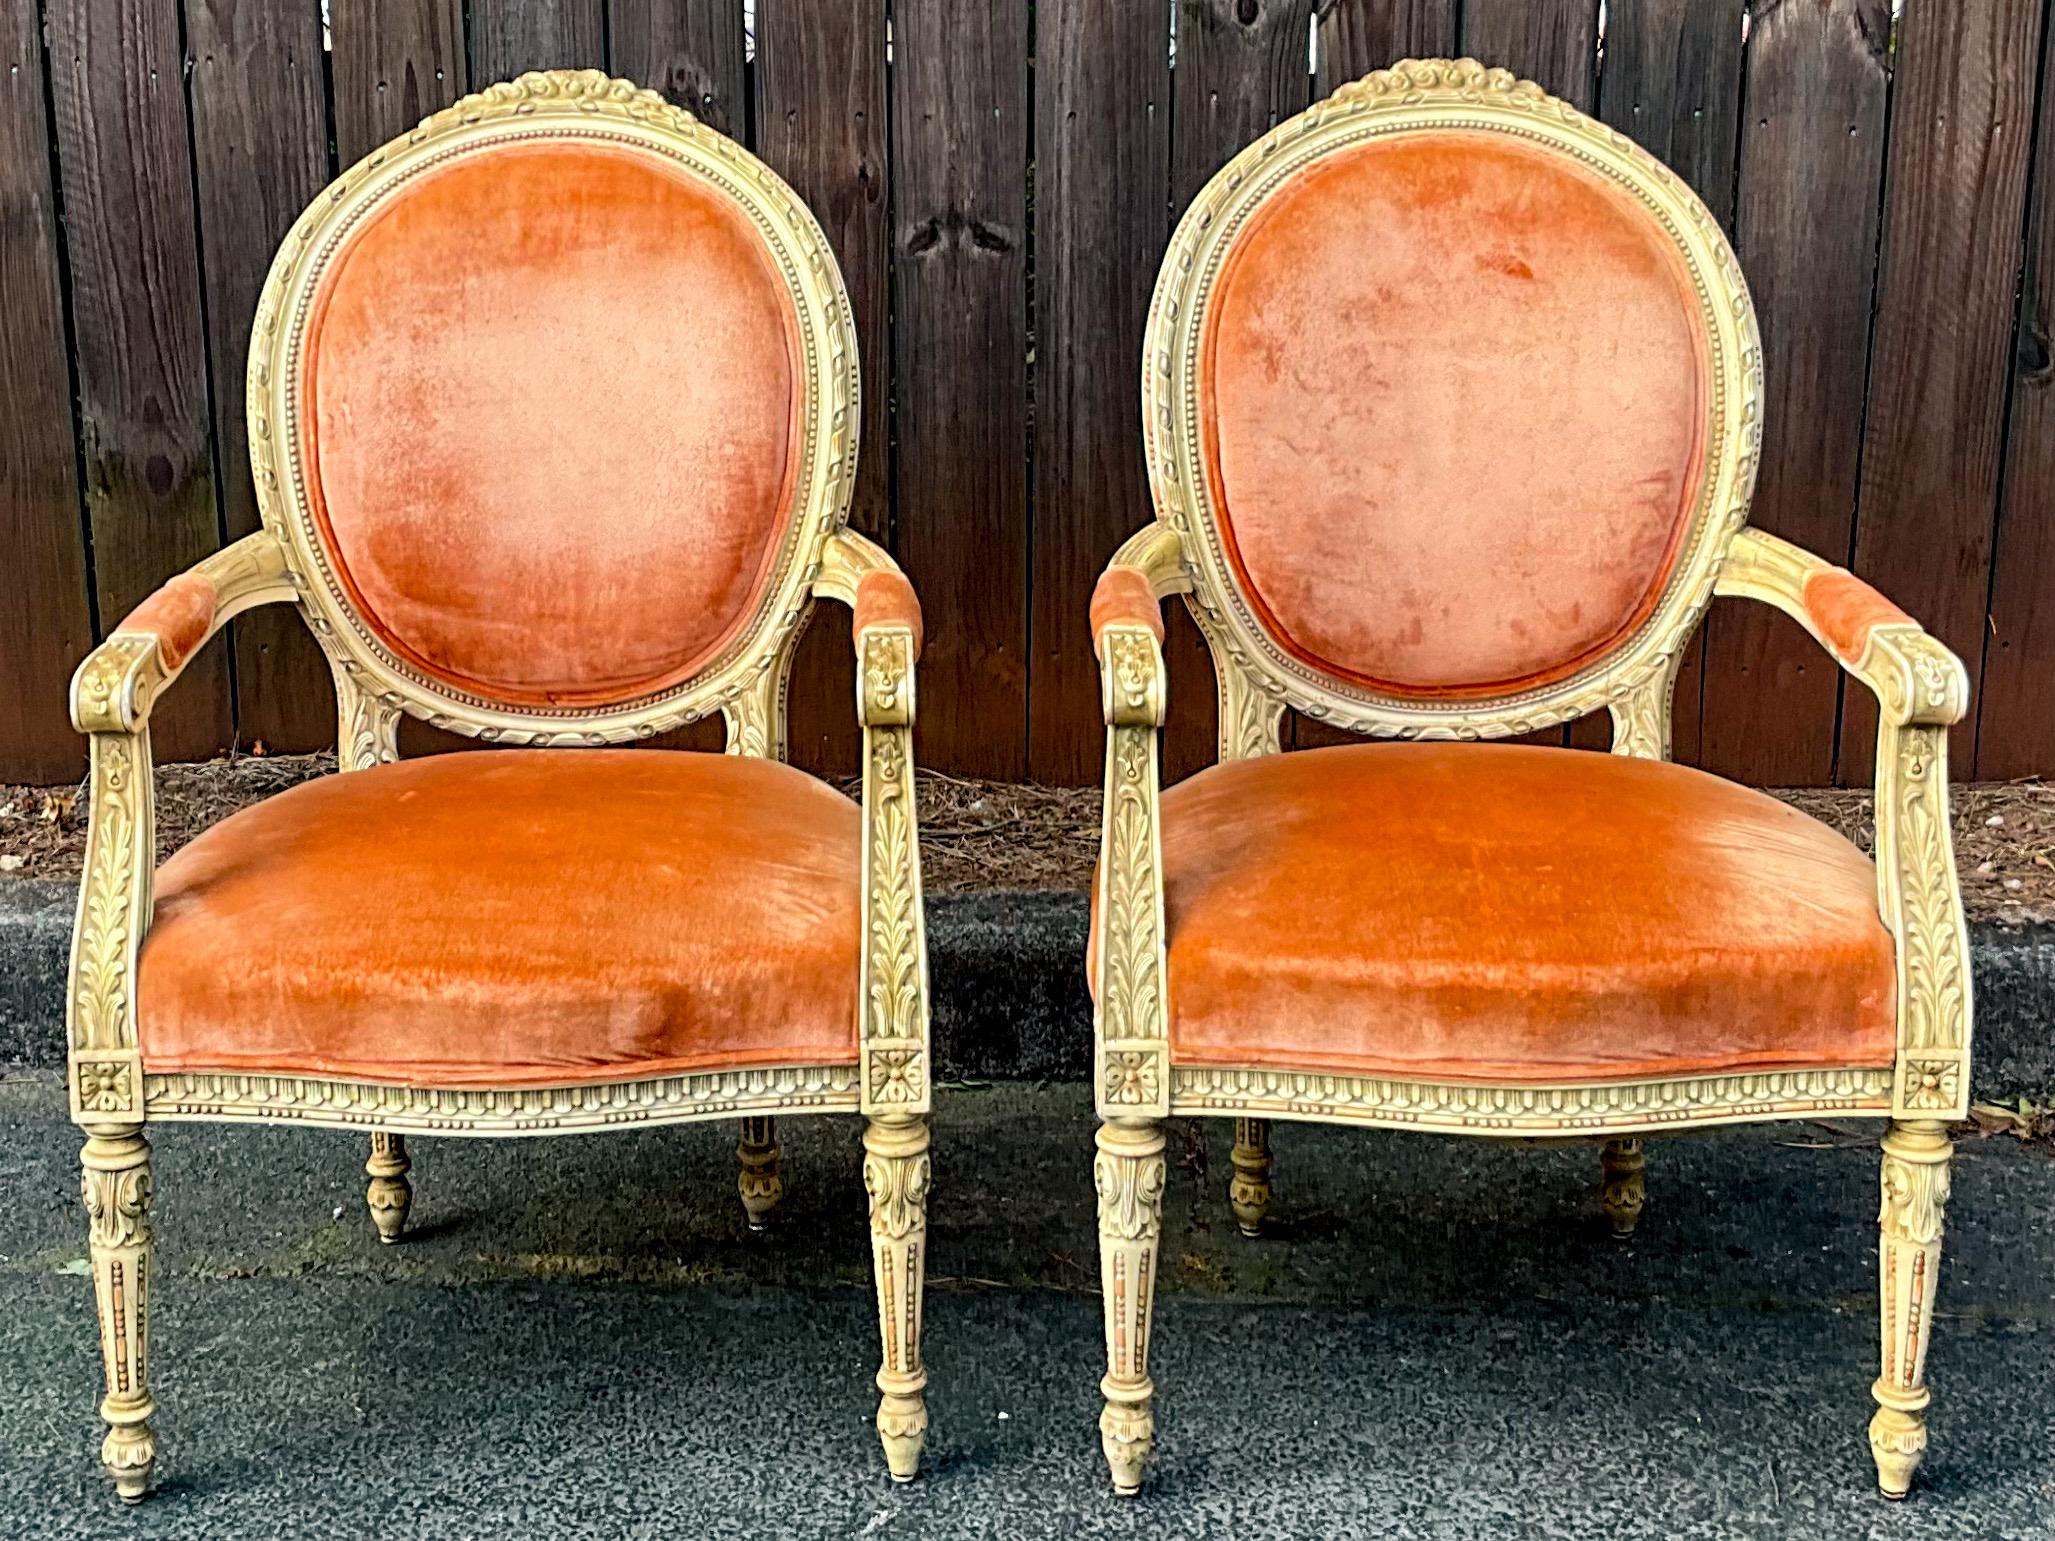 This is a nicely carved French Louis XVI style bergere chairs in original velvet. I believe they date to the 1940s or 50s. The frame is painted in an antique ivory and is in very good condition. The velvet shows wear. They are unmarked. Arm; 25.75”.